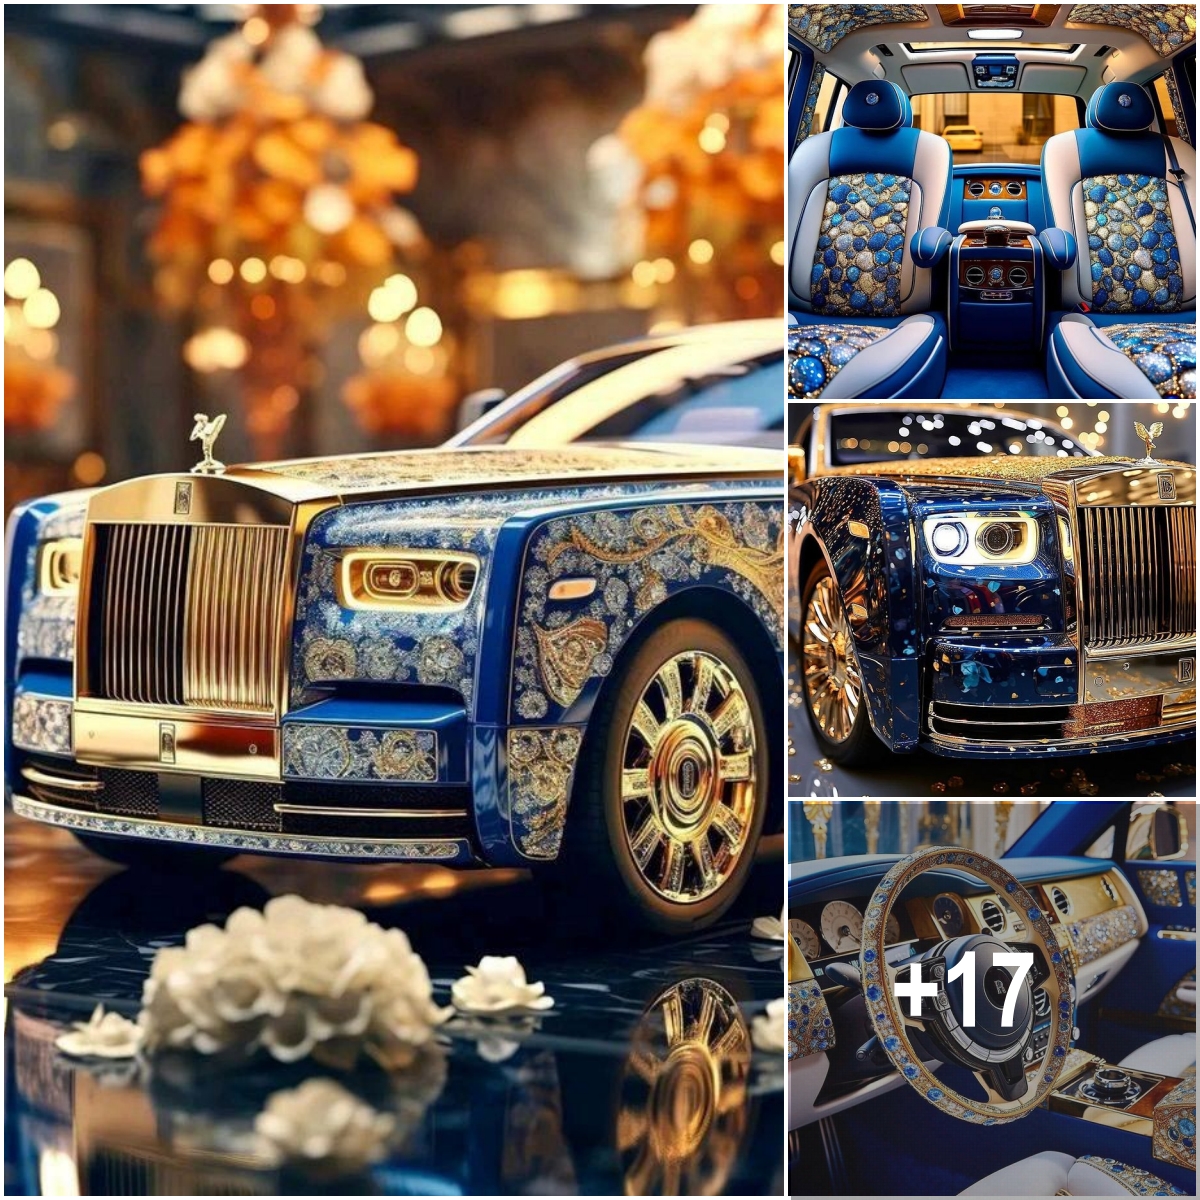 Introducing the “Royal Azure” Rolls Royce Concept with Unique Pattern